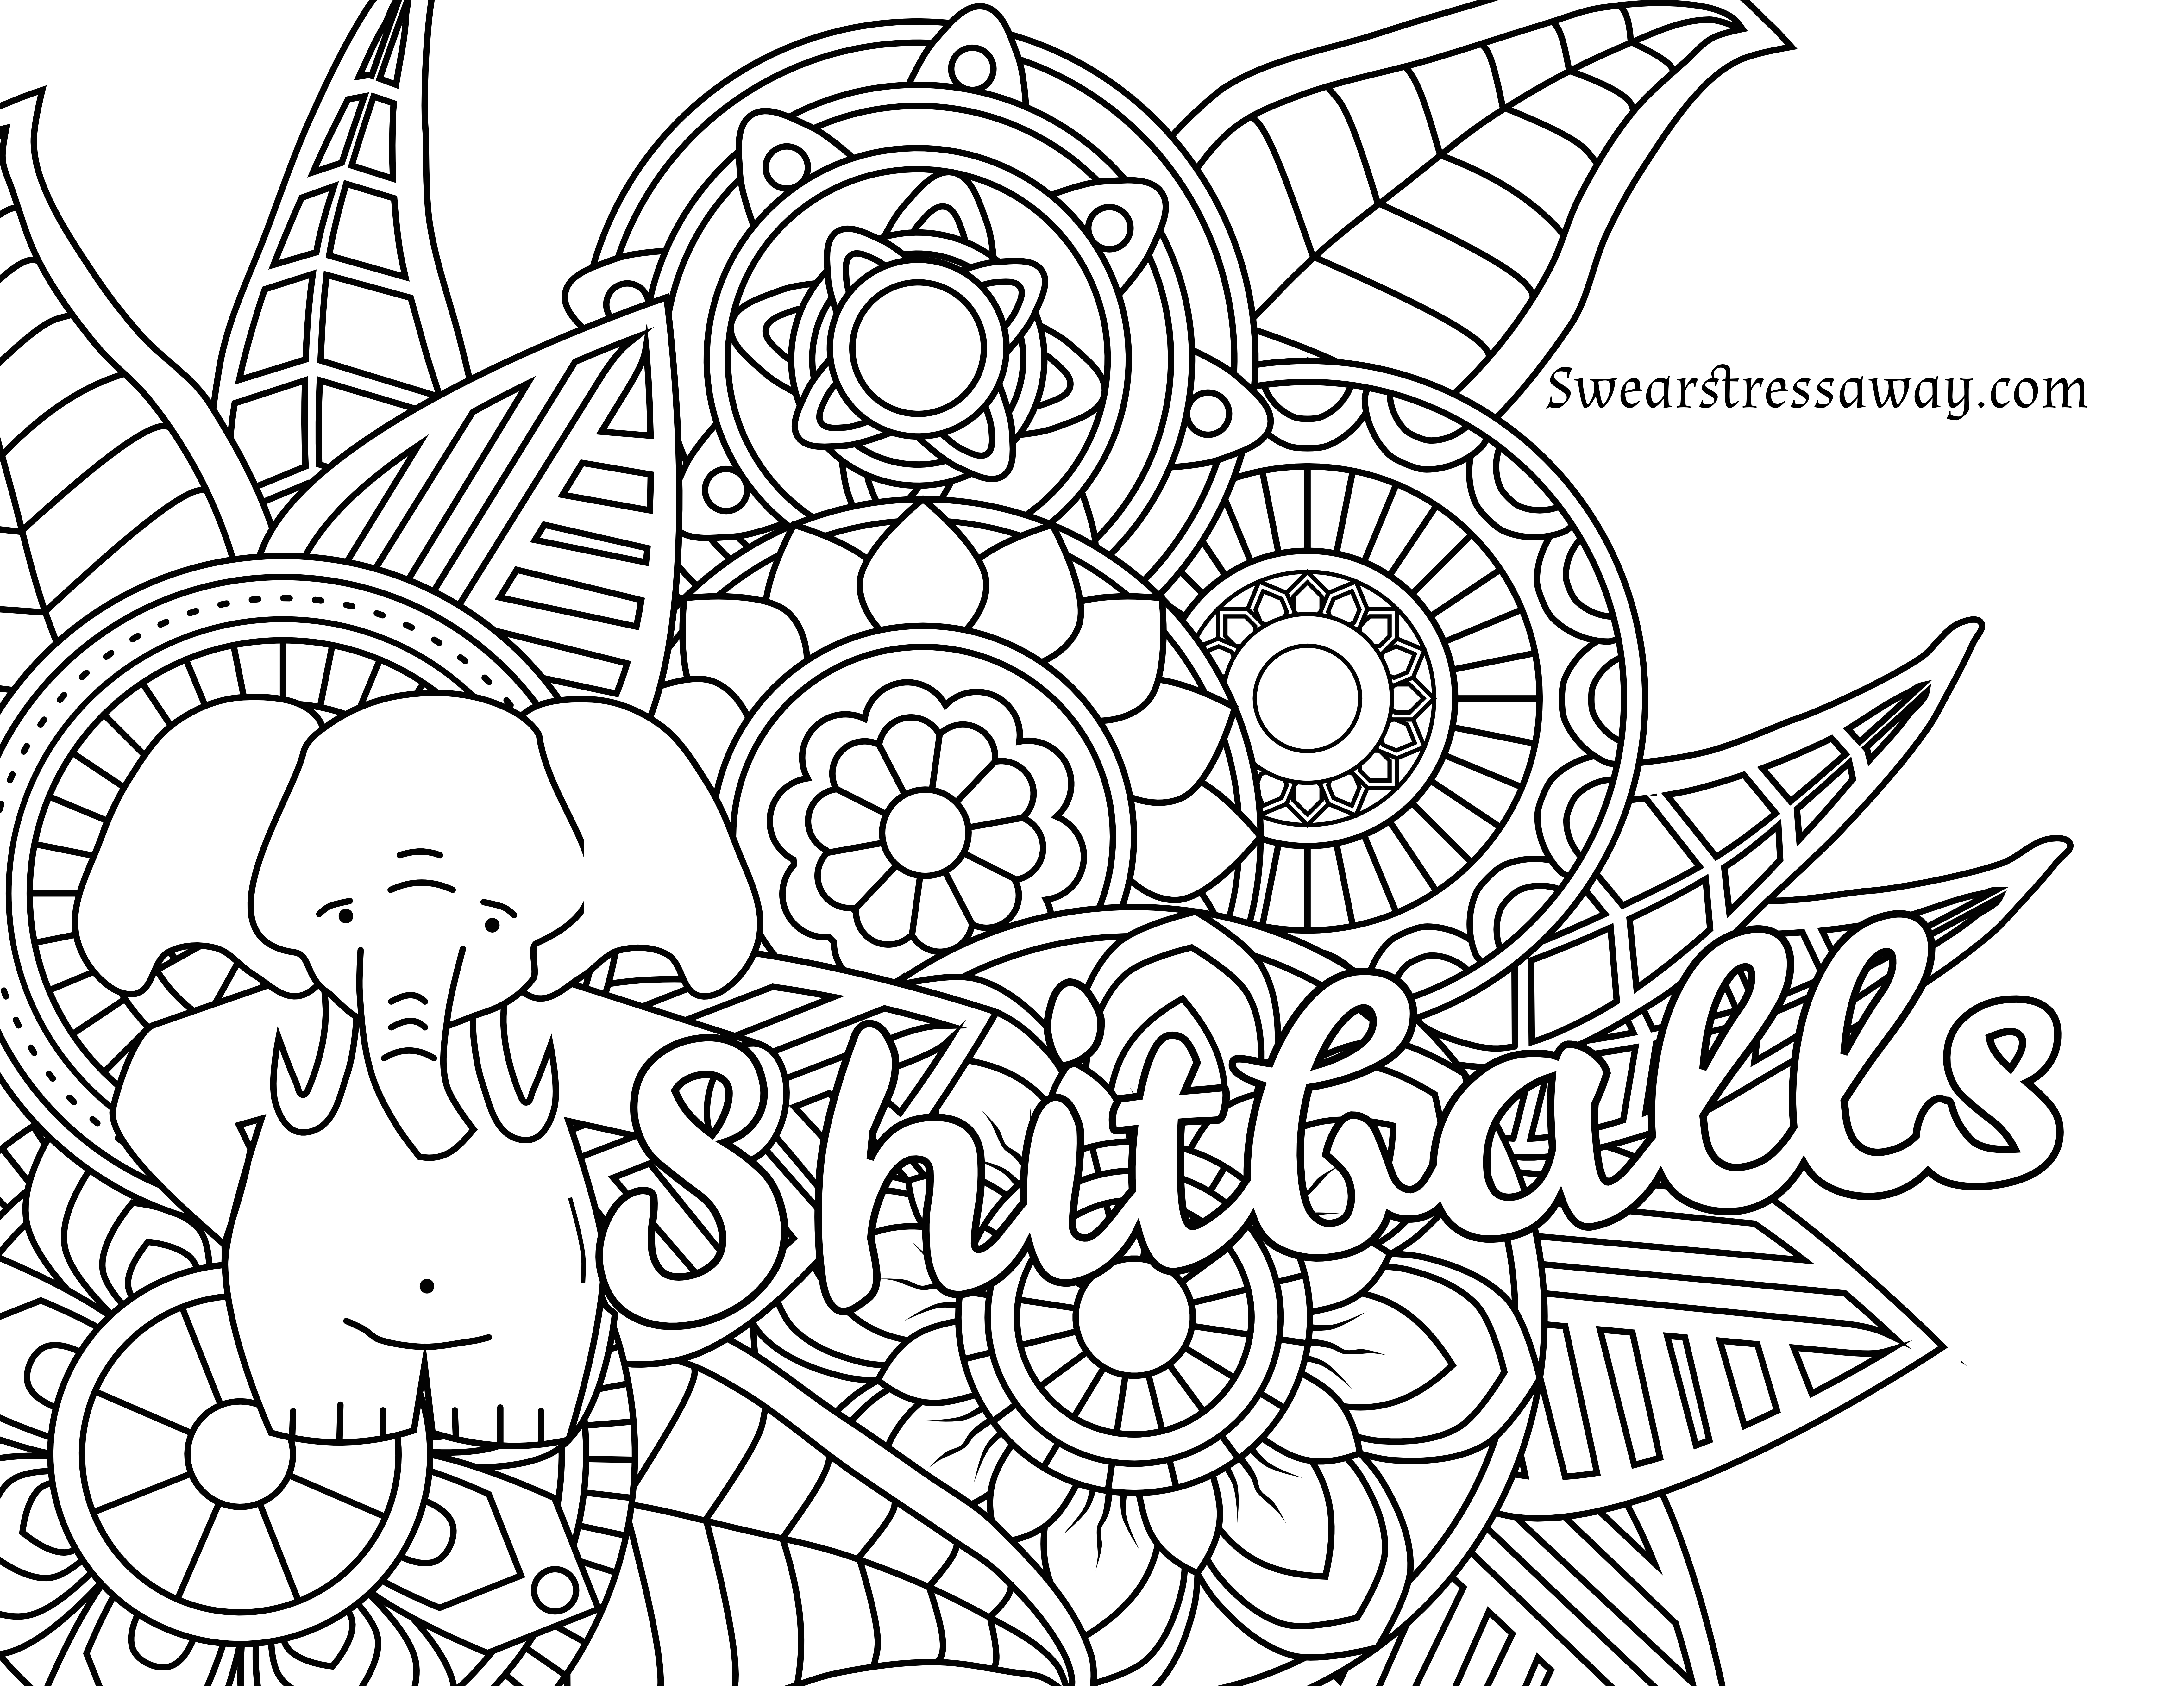 Free Printable Coloring Page - Shitballs - Swear Word Coloring Page - Free Printable Coloring Pages For Adults Only Swear Words